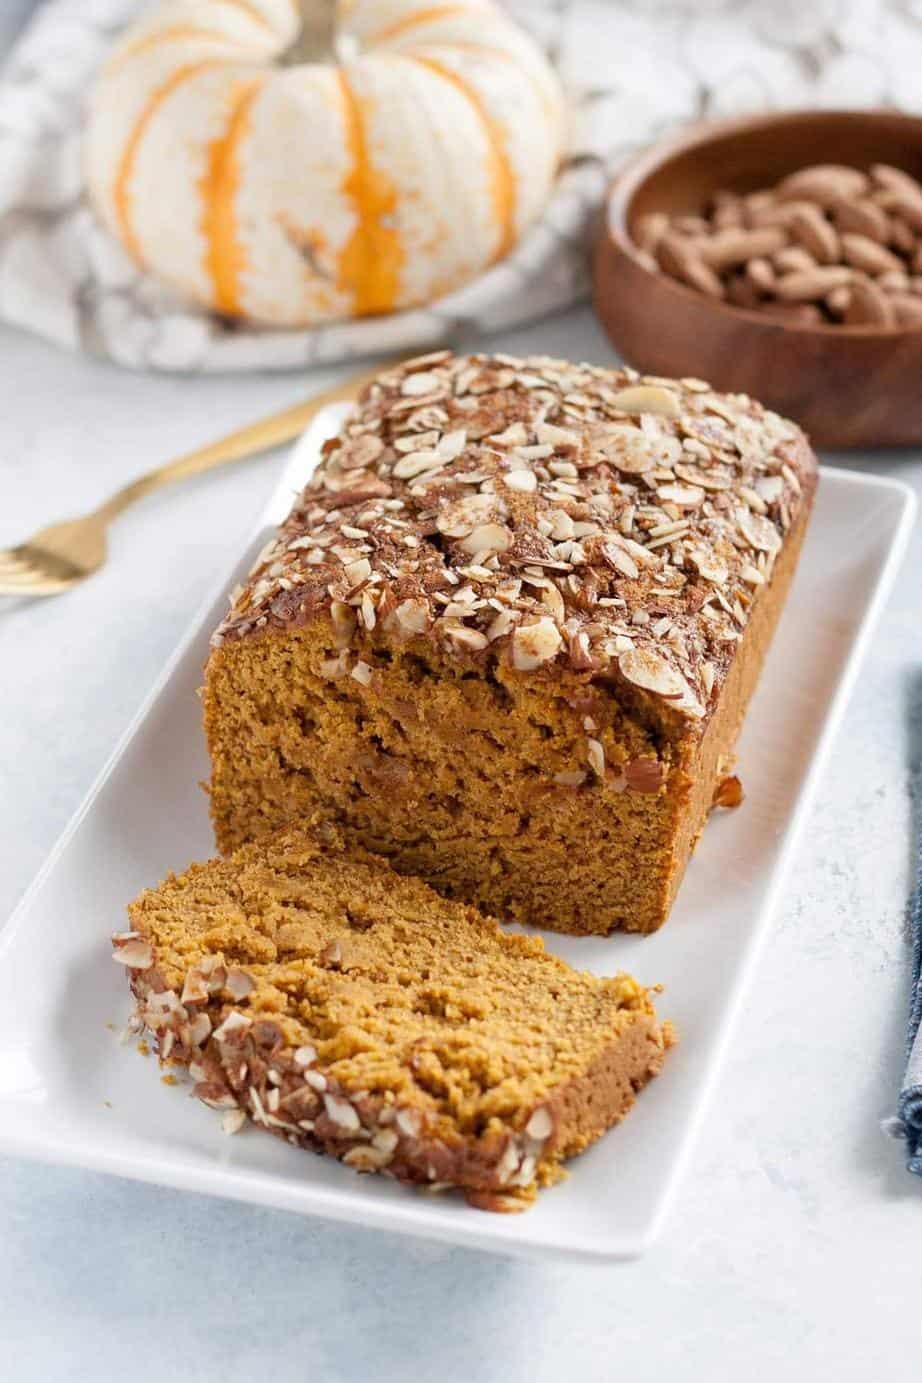  Warm up with a slice of our cozy pumpkin bread